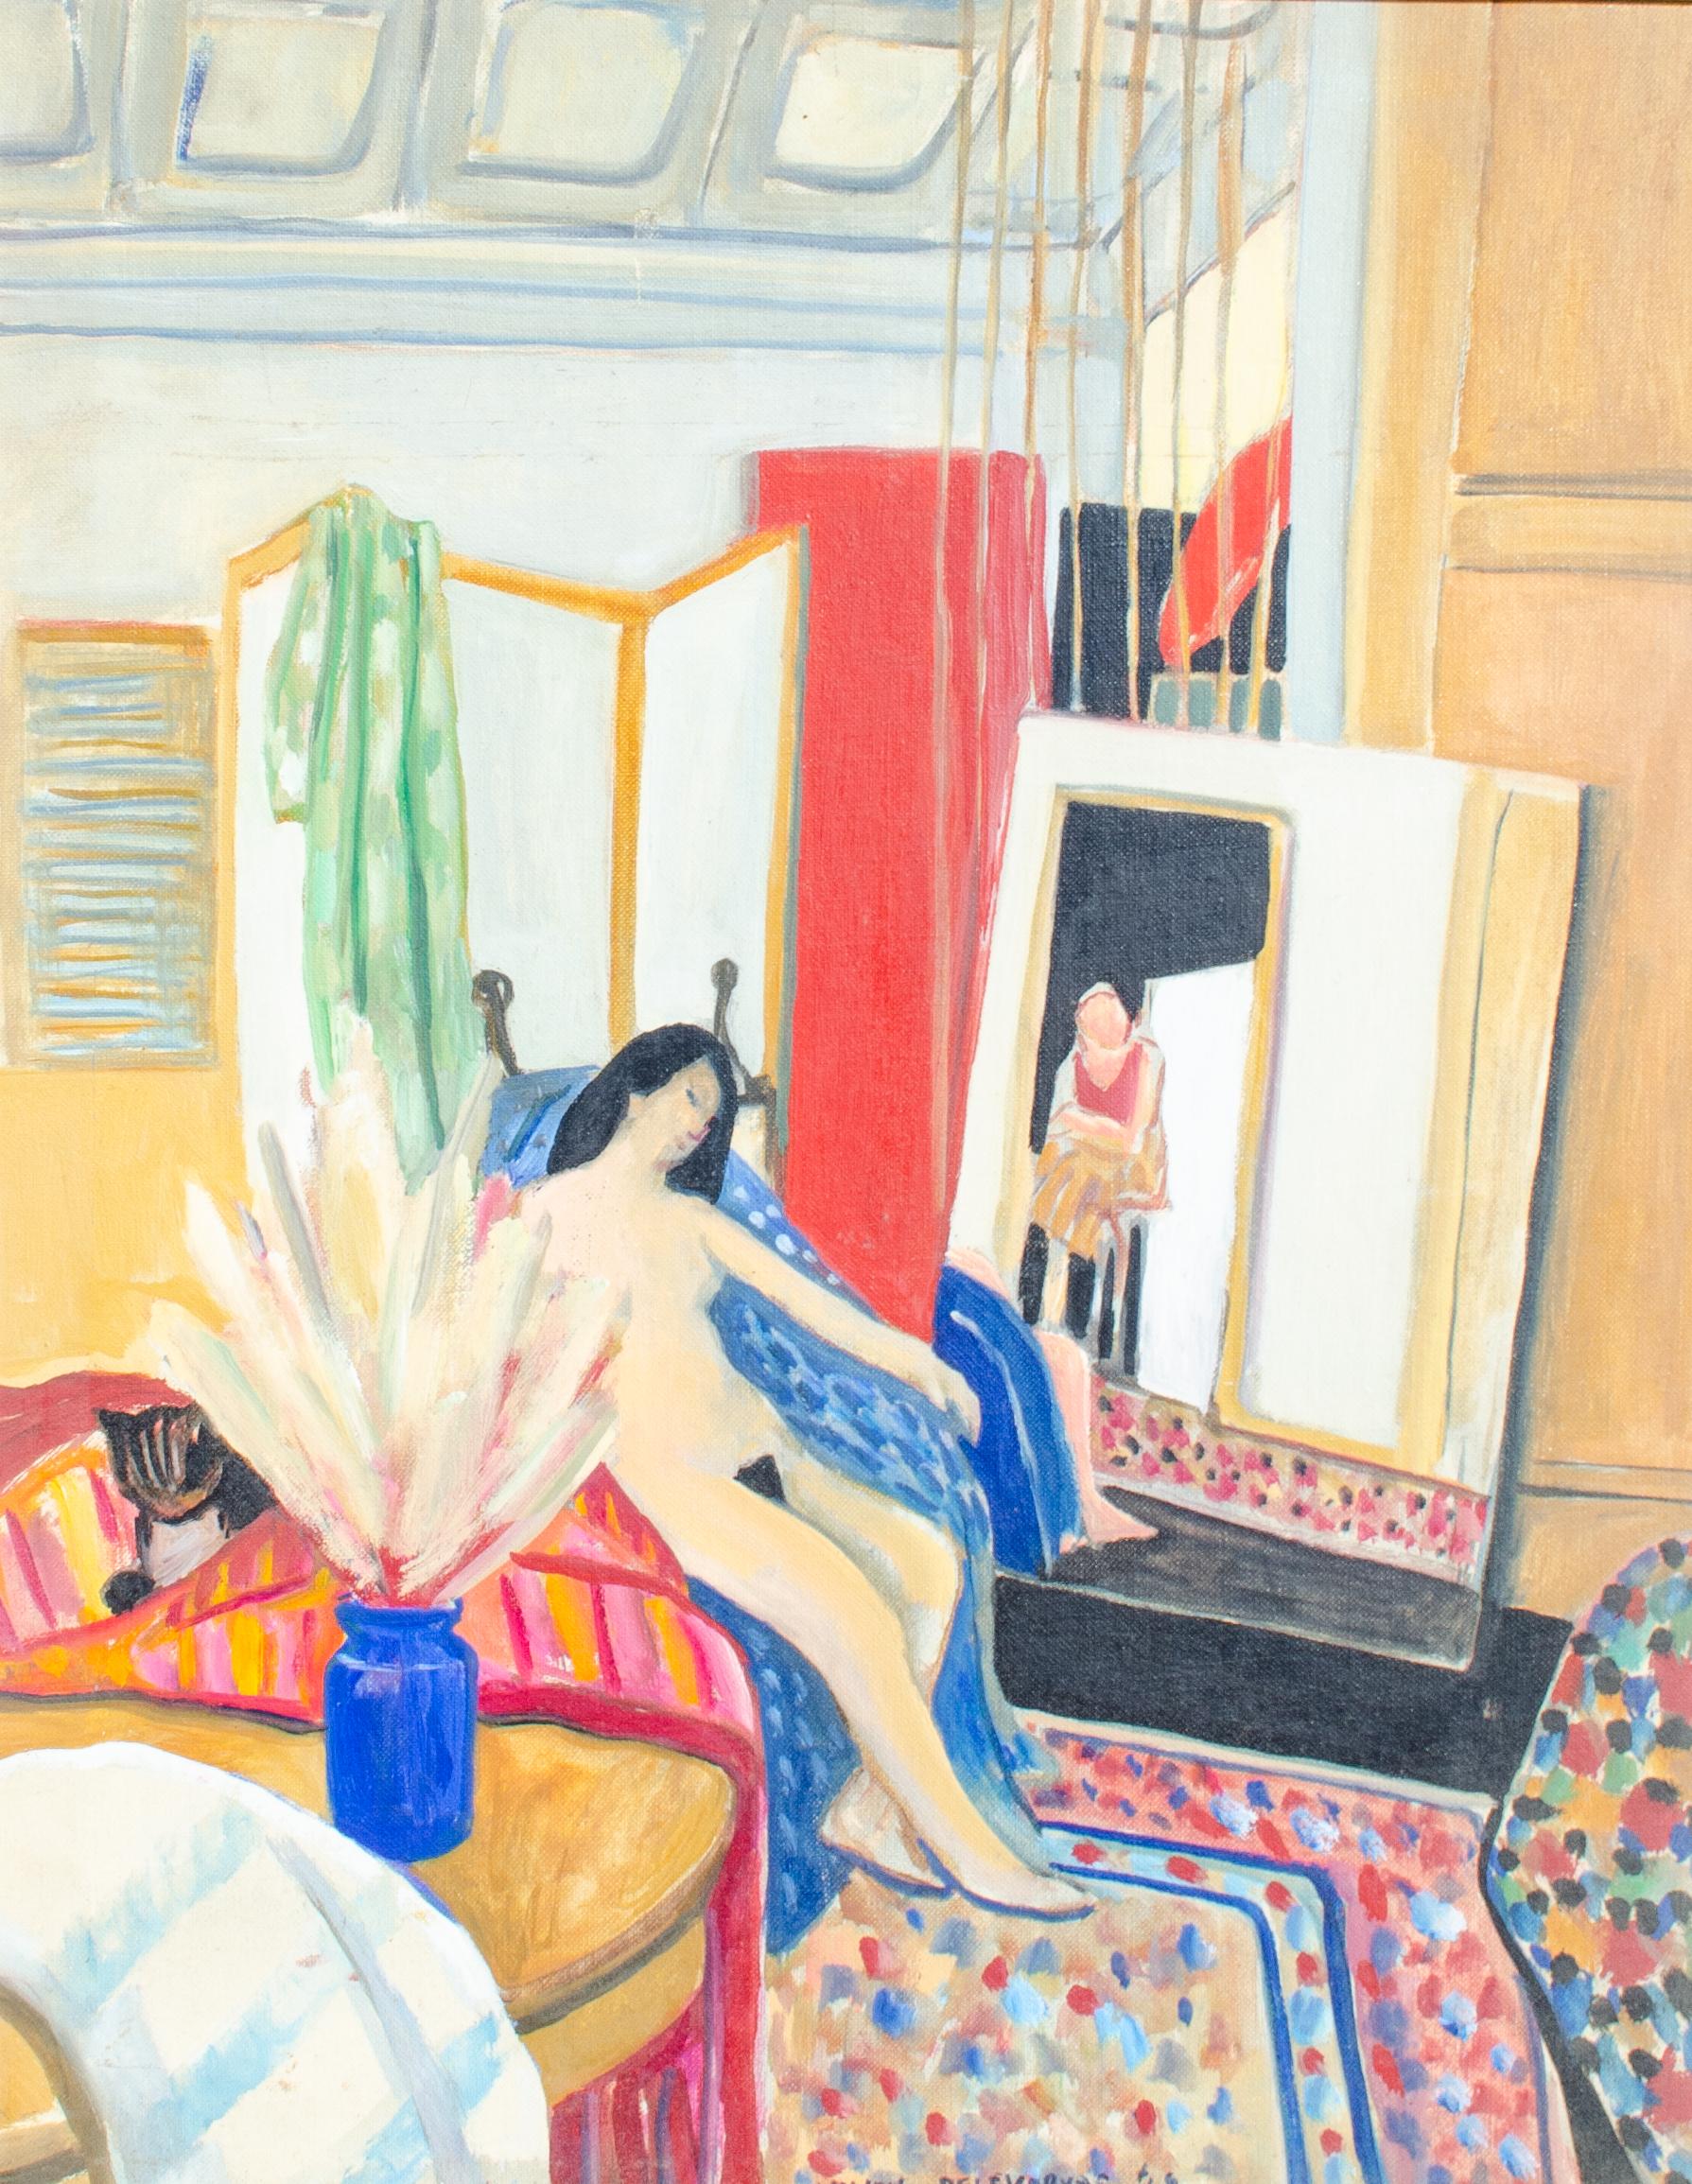 Lillian Delevoryas
Untitled (Nude & Interior), 1969
Oil on board
19 3/4 x 15 1/2 in.
Framed: 24 1/2 x 20 1/2 x 1 1/4 in.
Signed and dated lower right

Lillian Grace Delevoryas (January 3, 1932 - March 6, 2018) was an American artist whose career